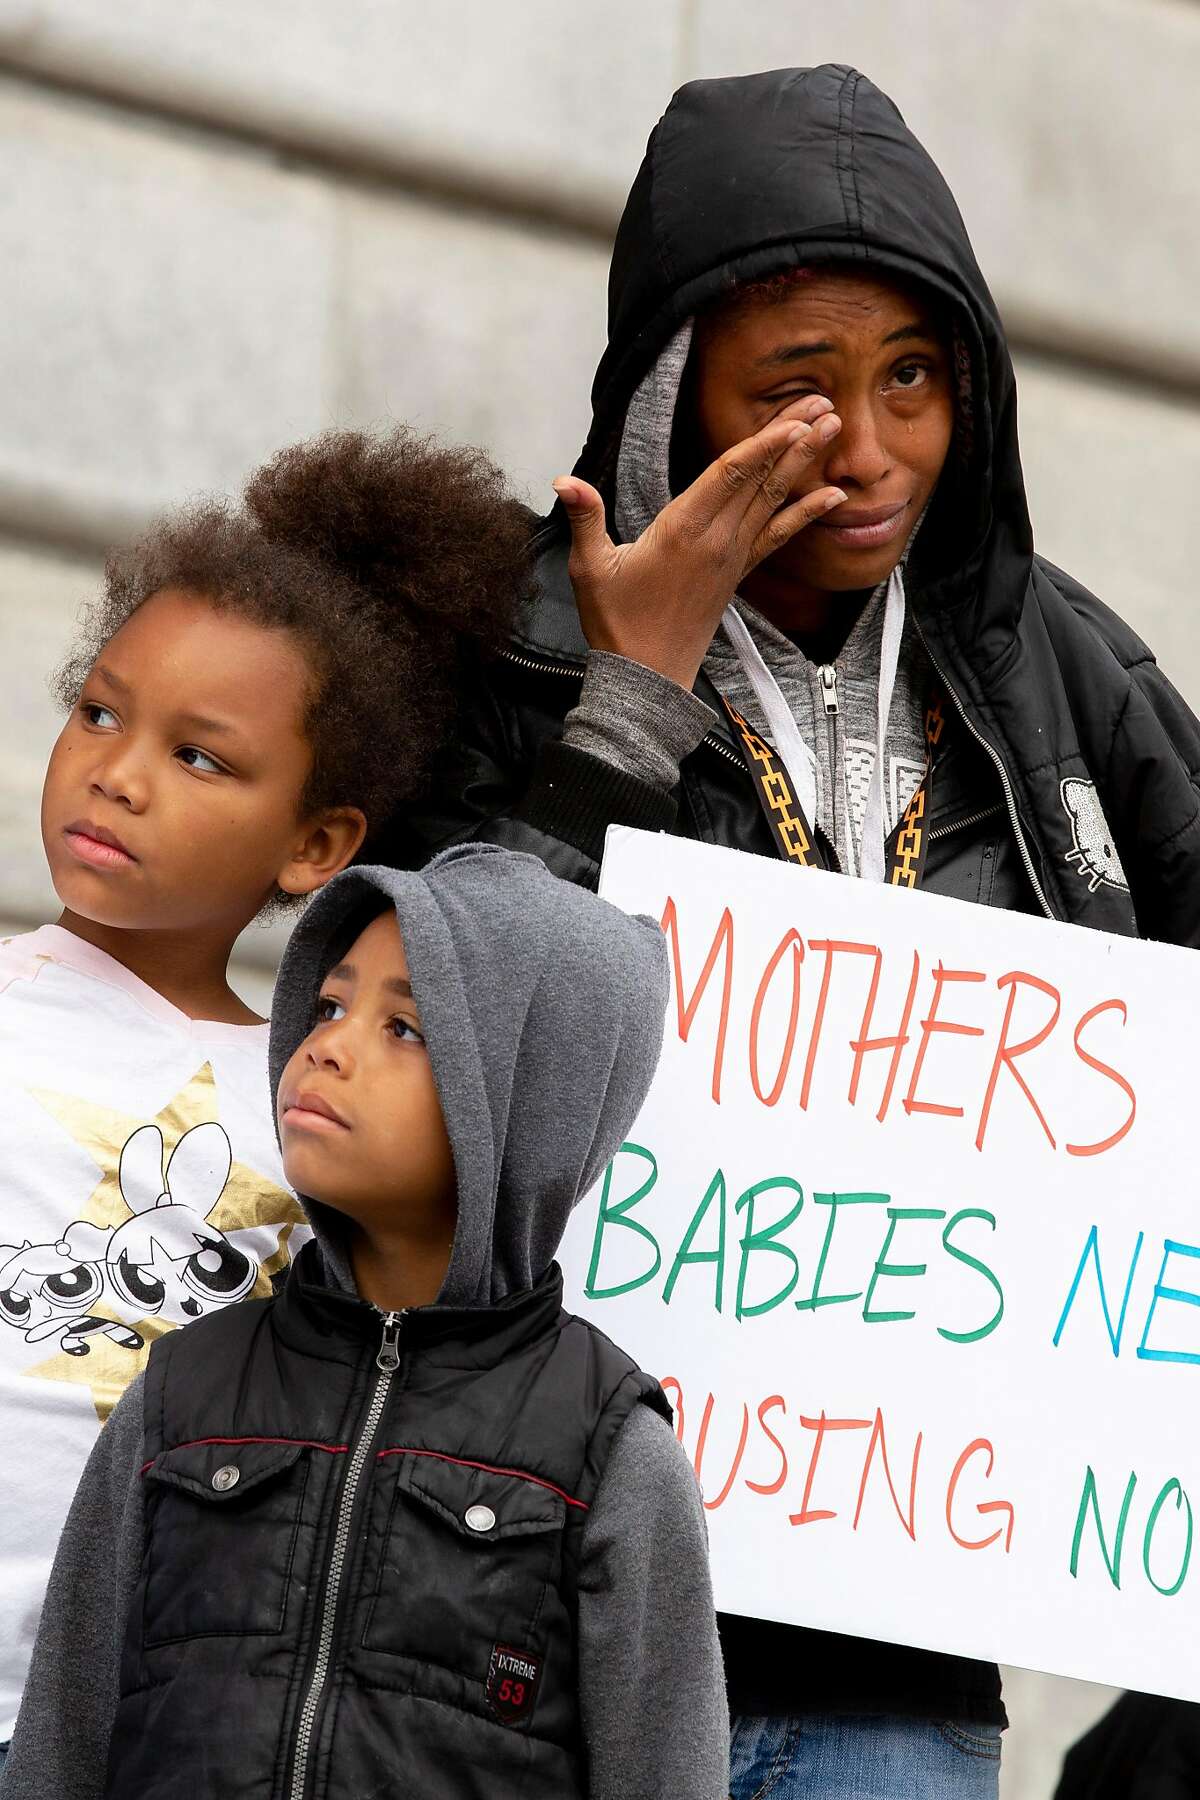 Dinahya Hairston with her children Marjorie Miles, 6, and Stephen Miles, 5, protest outside City Hall on Thursday, May 9, 2019, in San Francisco, Calif. Homeless mothers and their supporters rallied to demand the city for housing subsidies, navigation centers and shelter funding for homeless families. Hairston is living with her children in a homeless shelter for families.